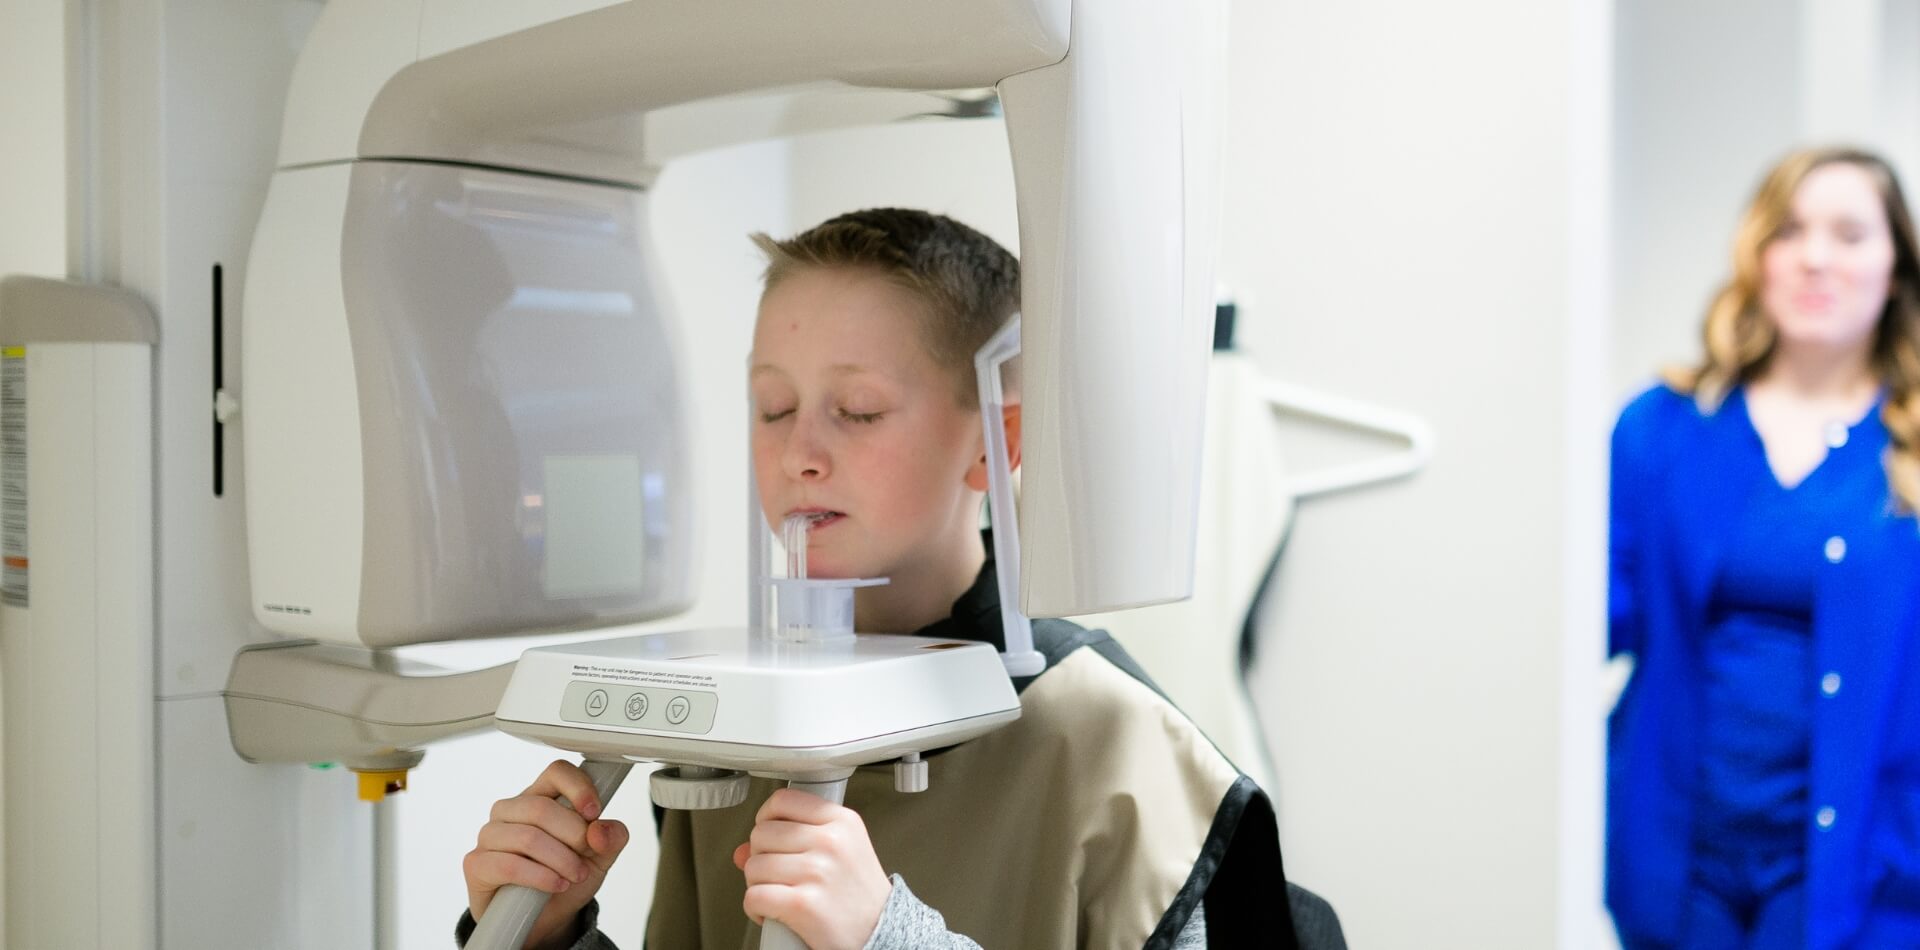 A patient using an X-ray machine at a dental clinic